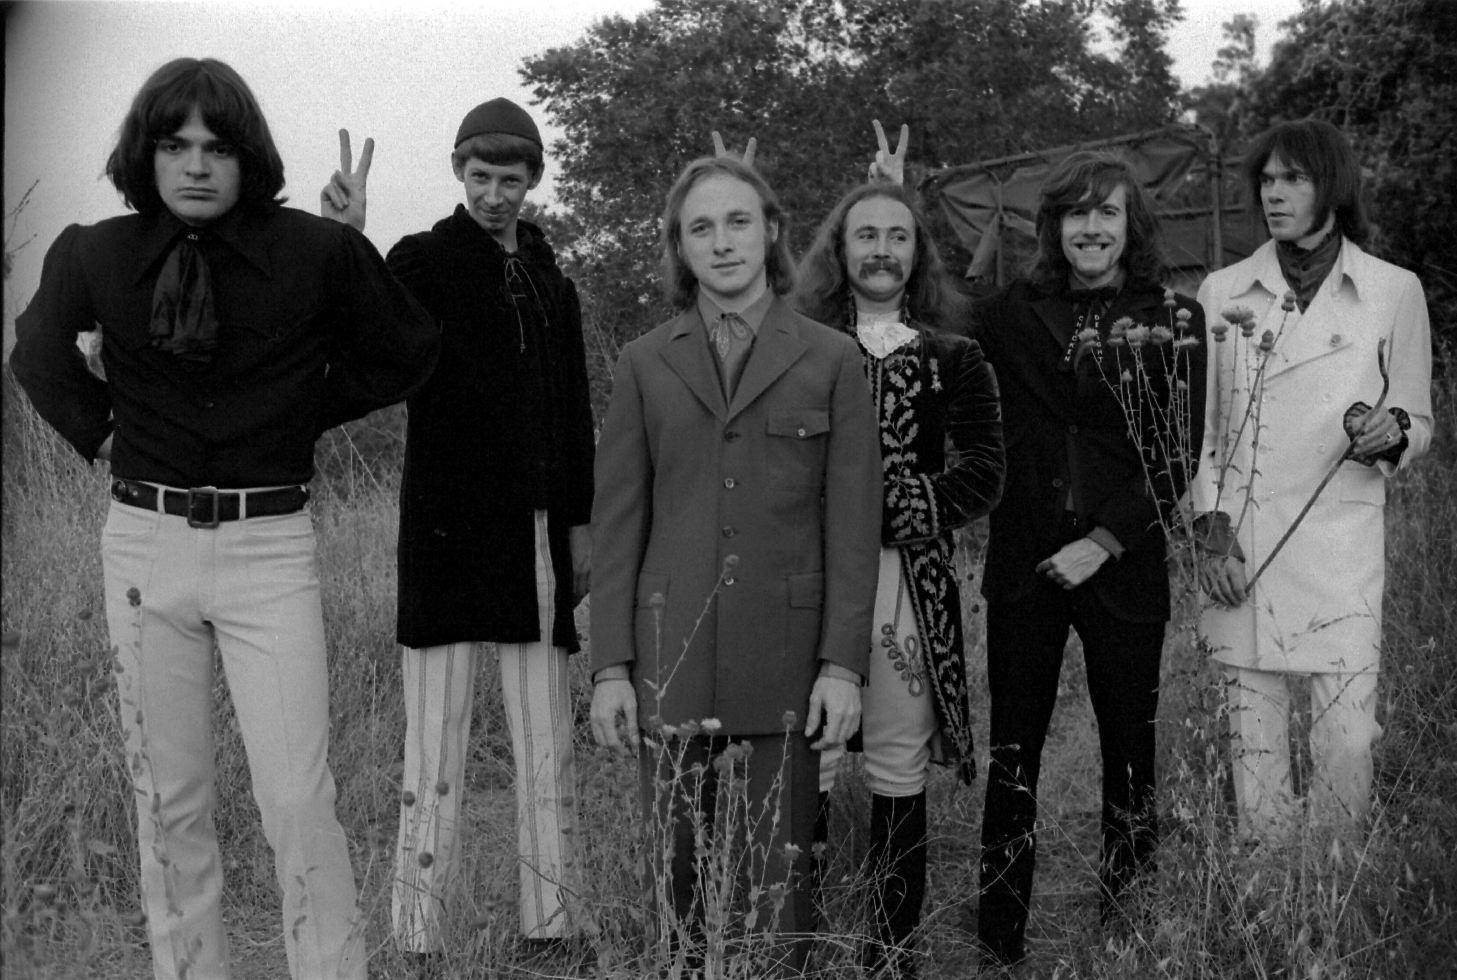 Crosby, Stills, Nash & Young Male Group Wallpaper